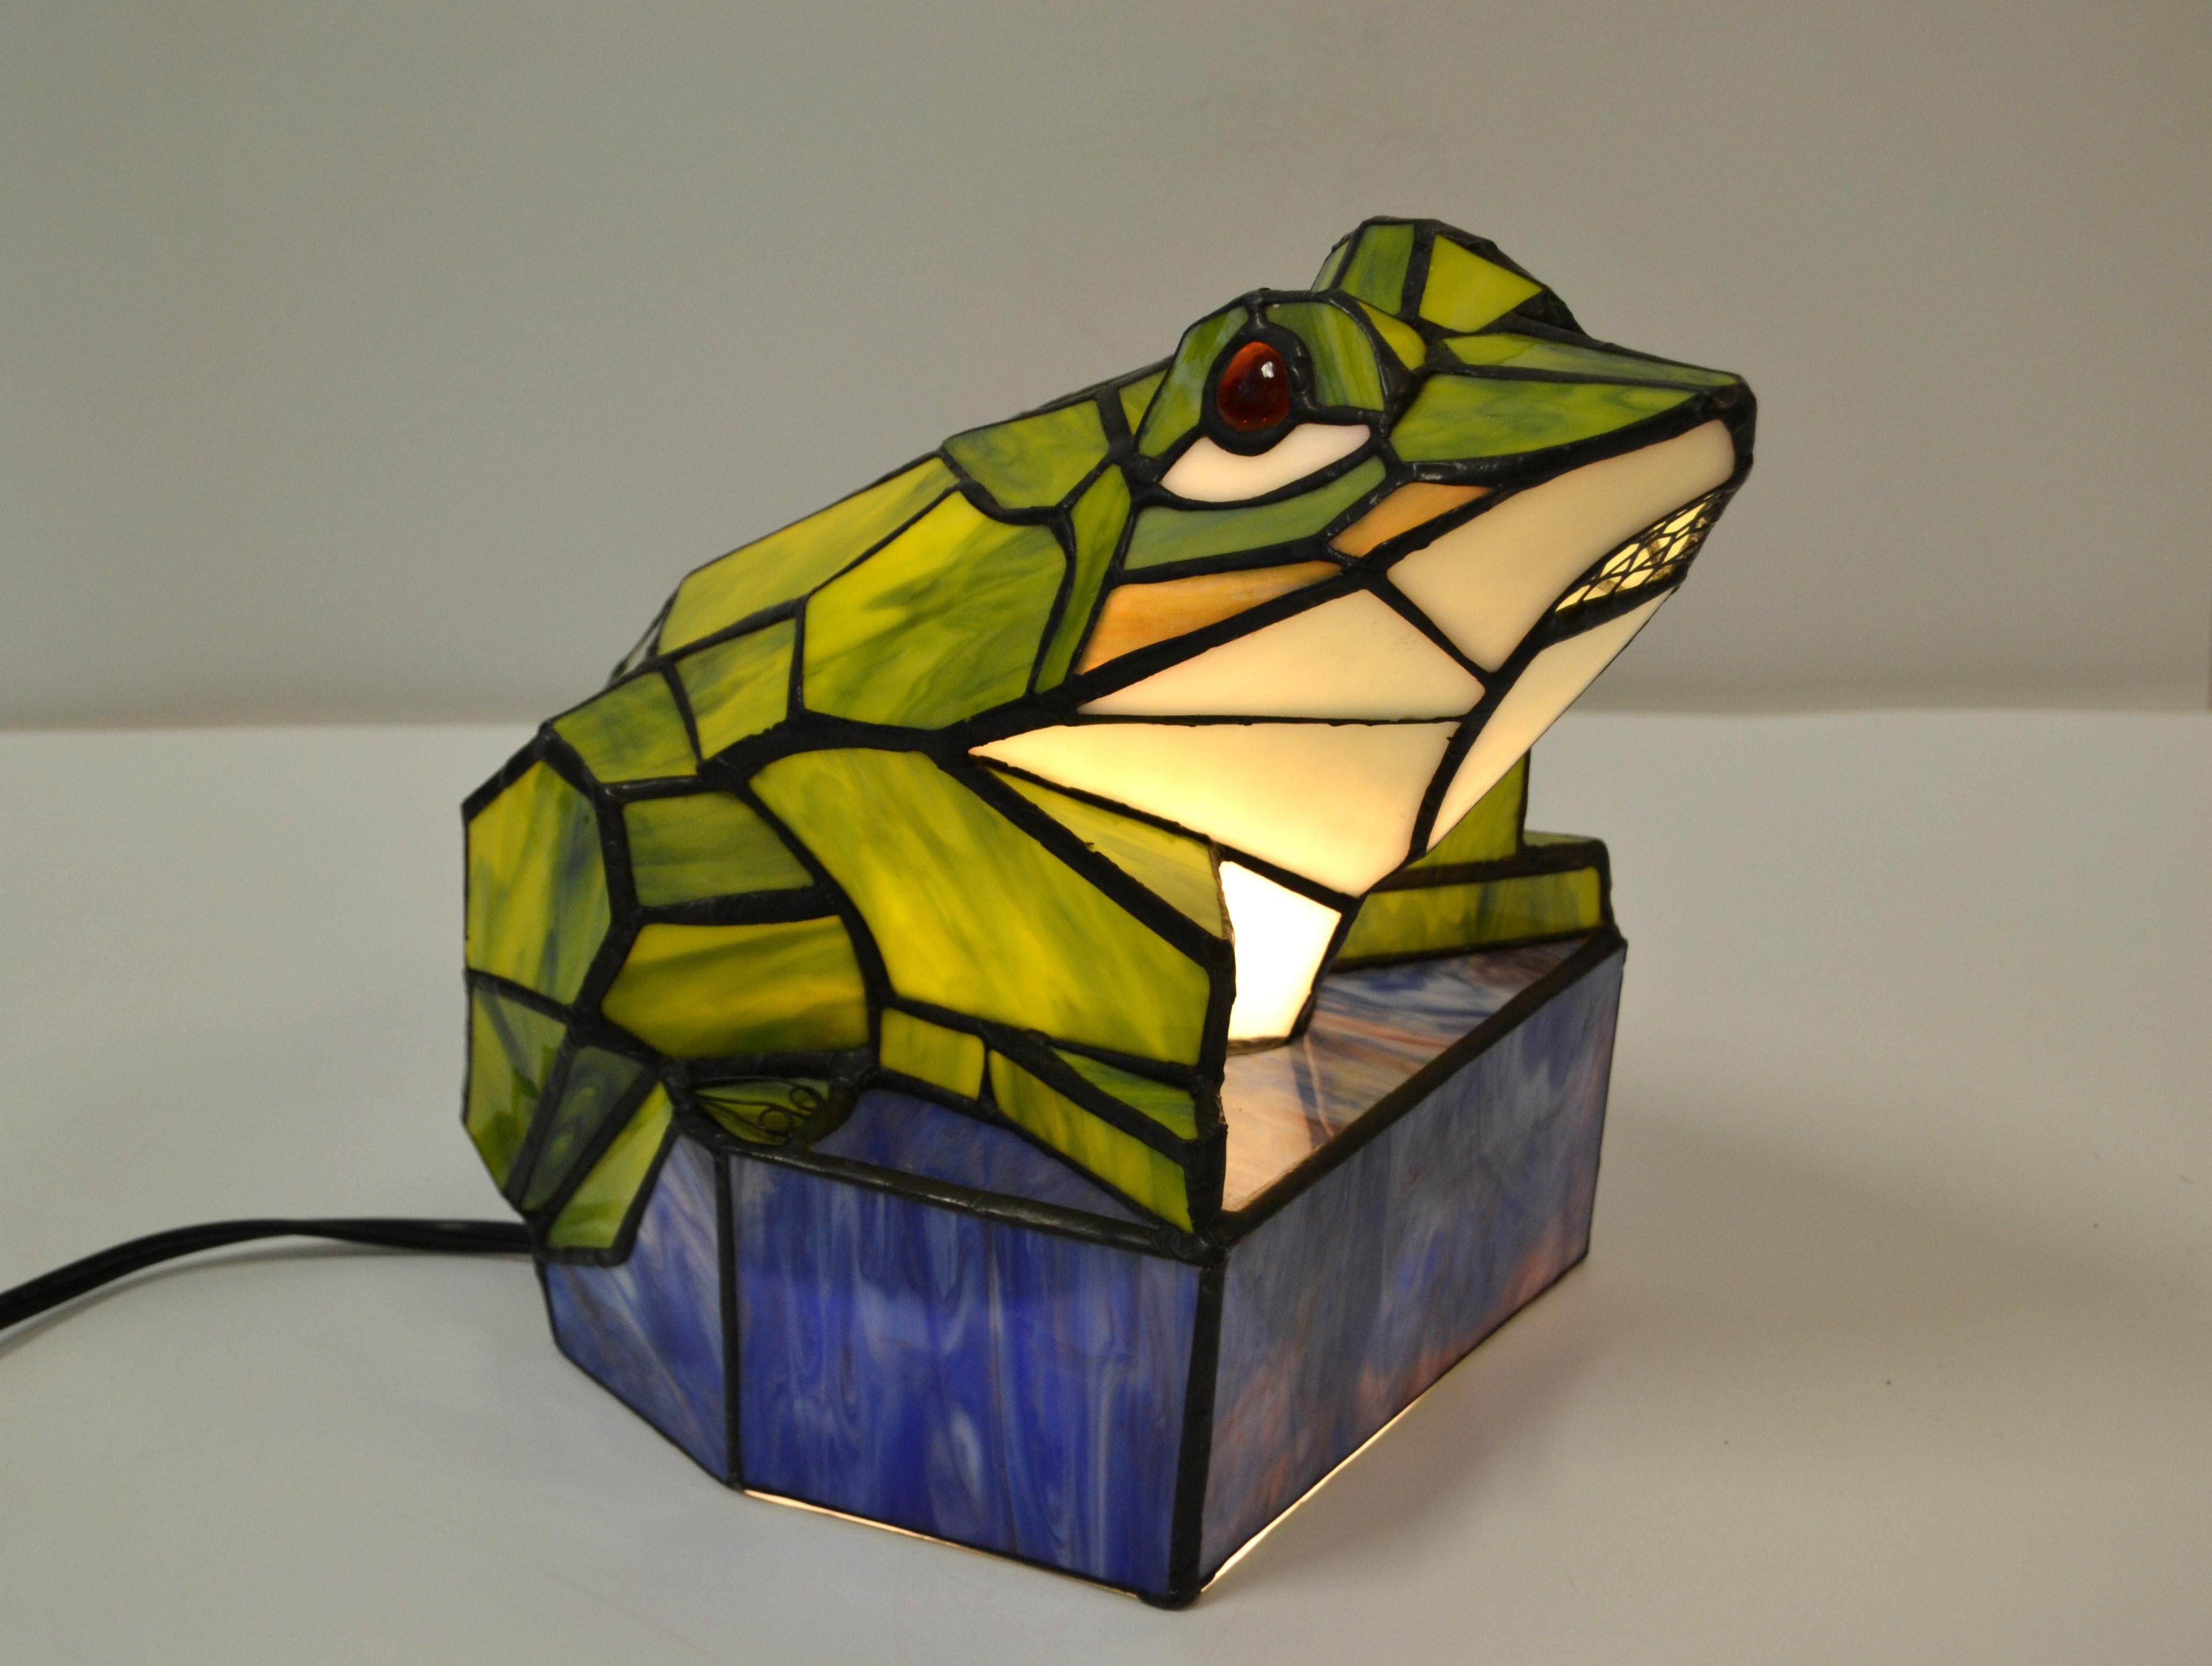 Stained green and blue art glass frog table lamp animal sculpture lamp.
Perfect working condition US wiring and takes one-light bulb with max. 40 watts.
This lamp brings joy to each children's room.